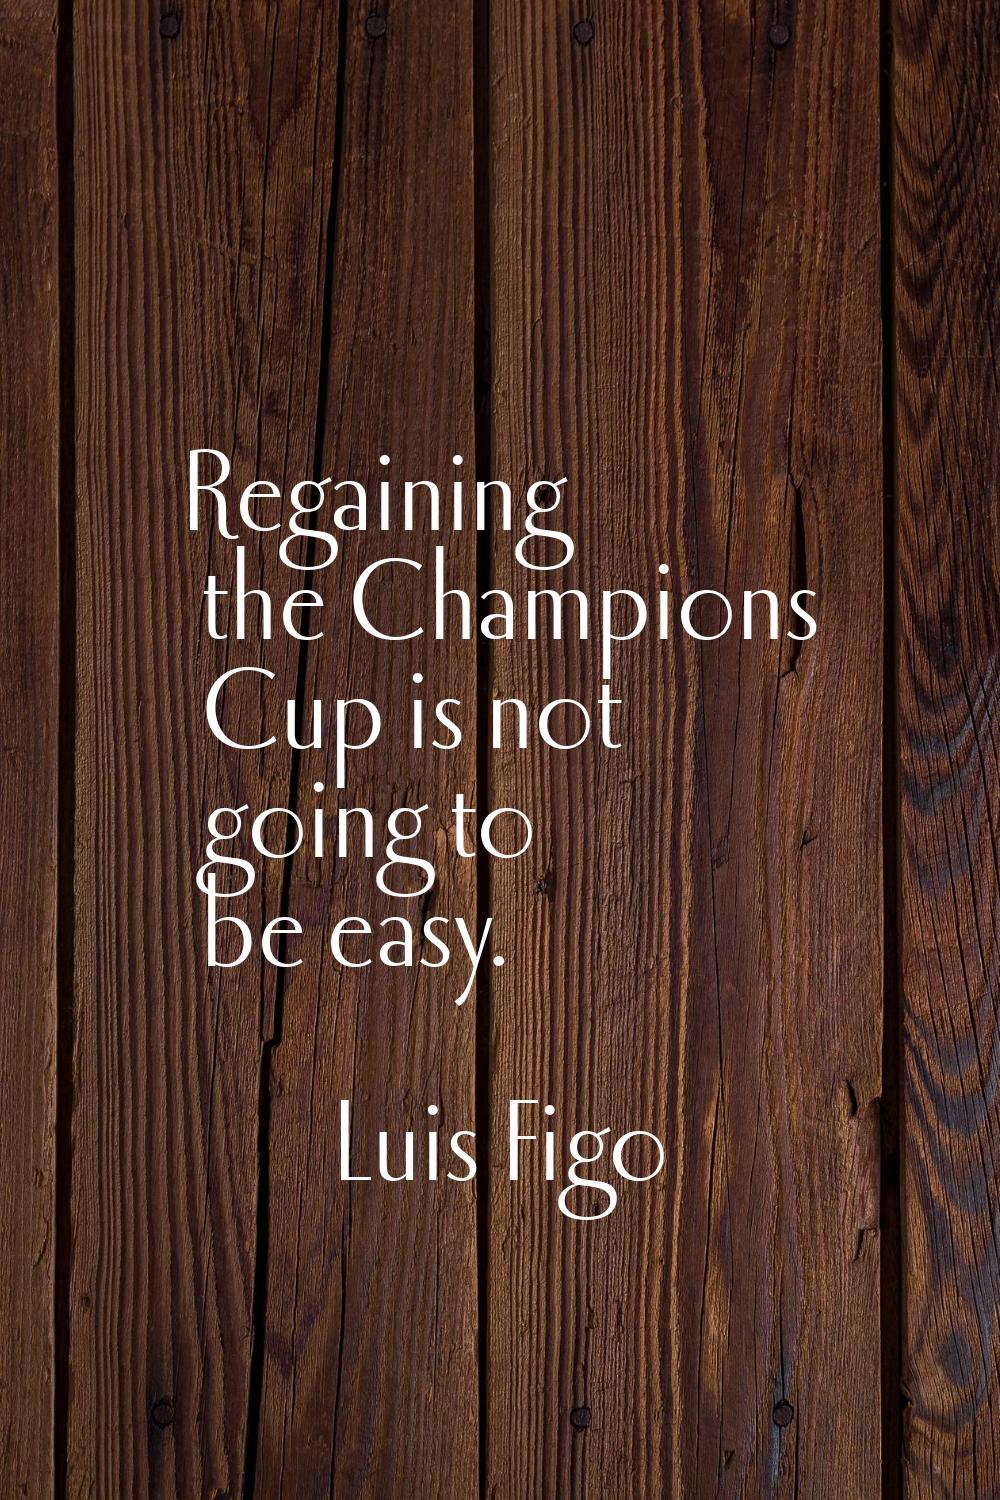 Regaining the Champions Cup is not going to be easy.